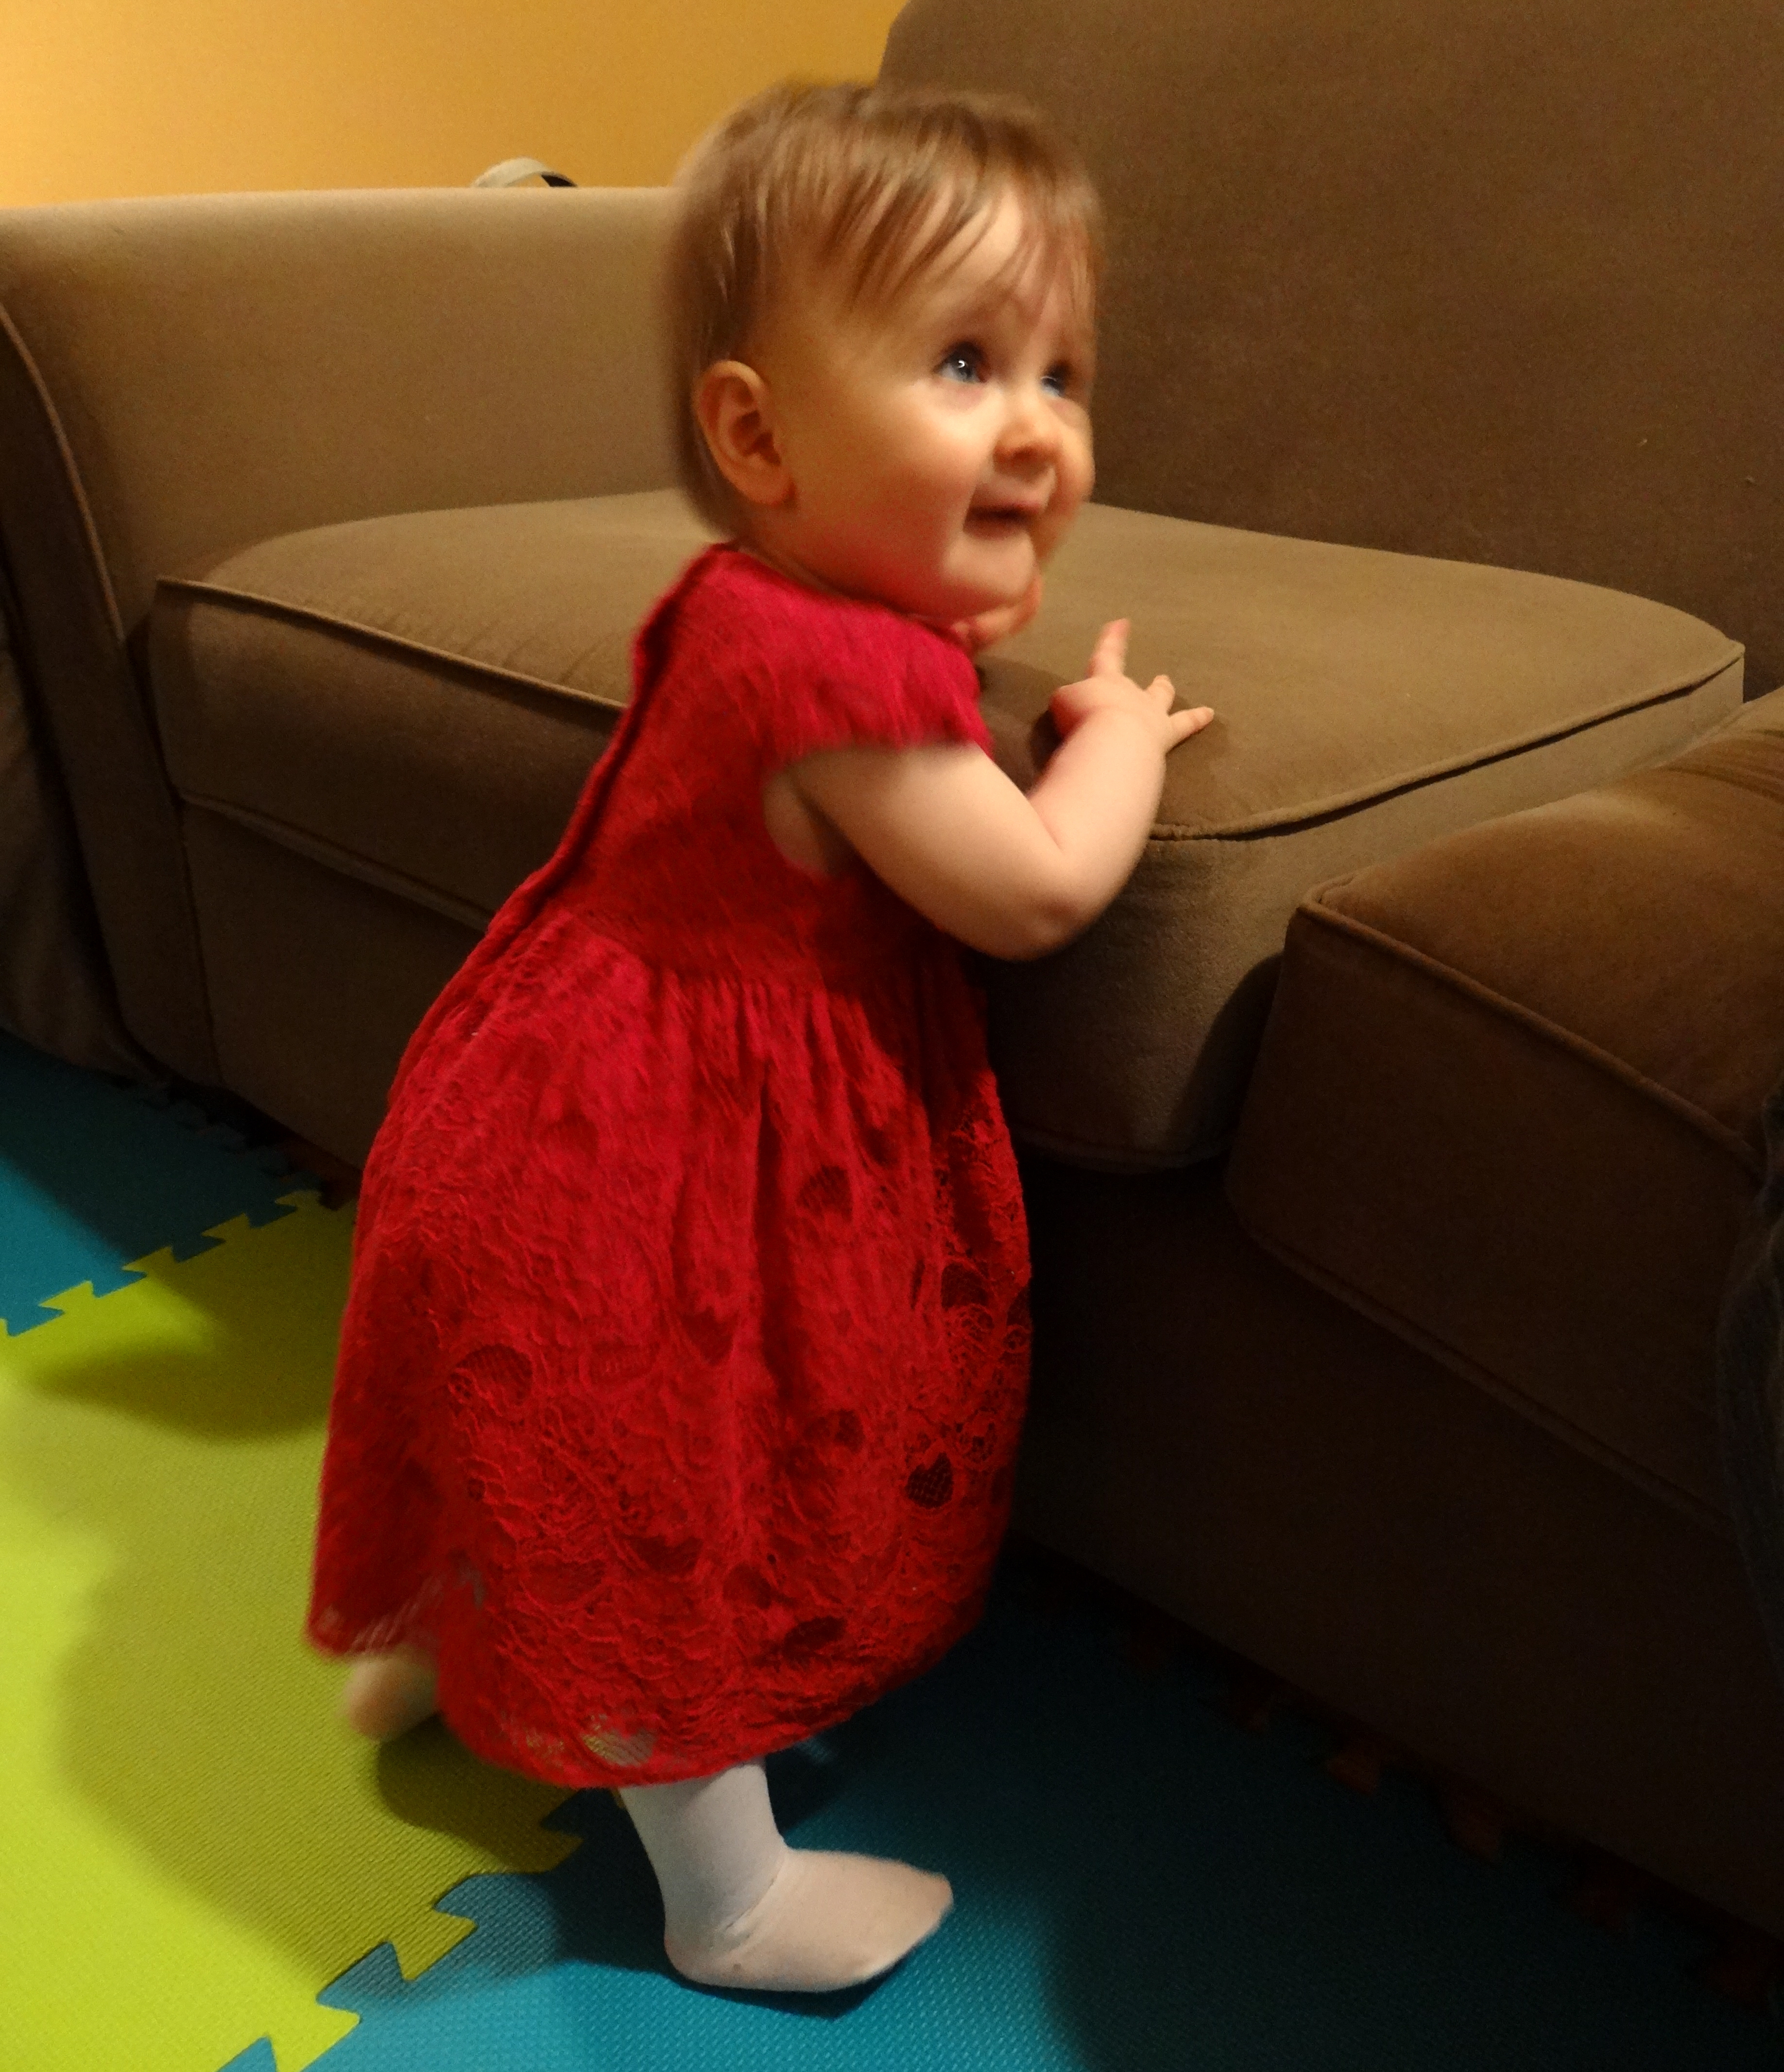 Baby girl in a red dress standing on her own